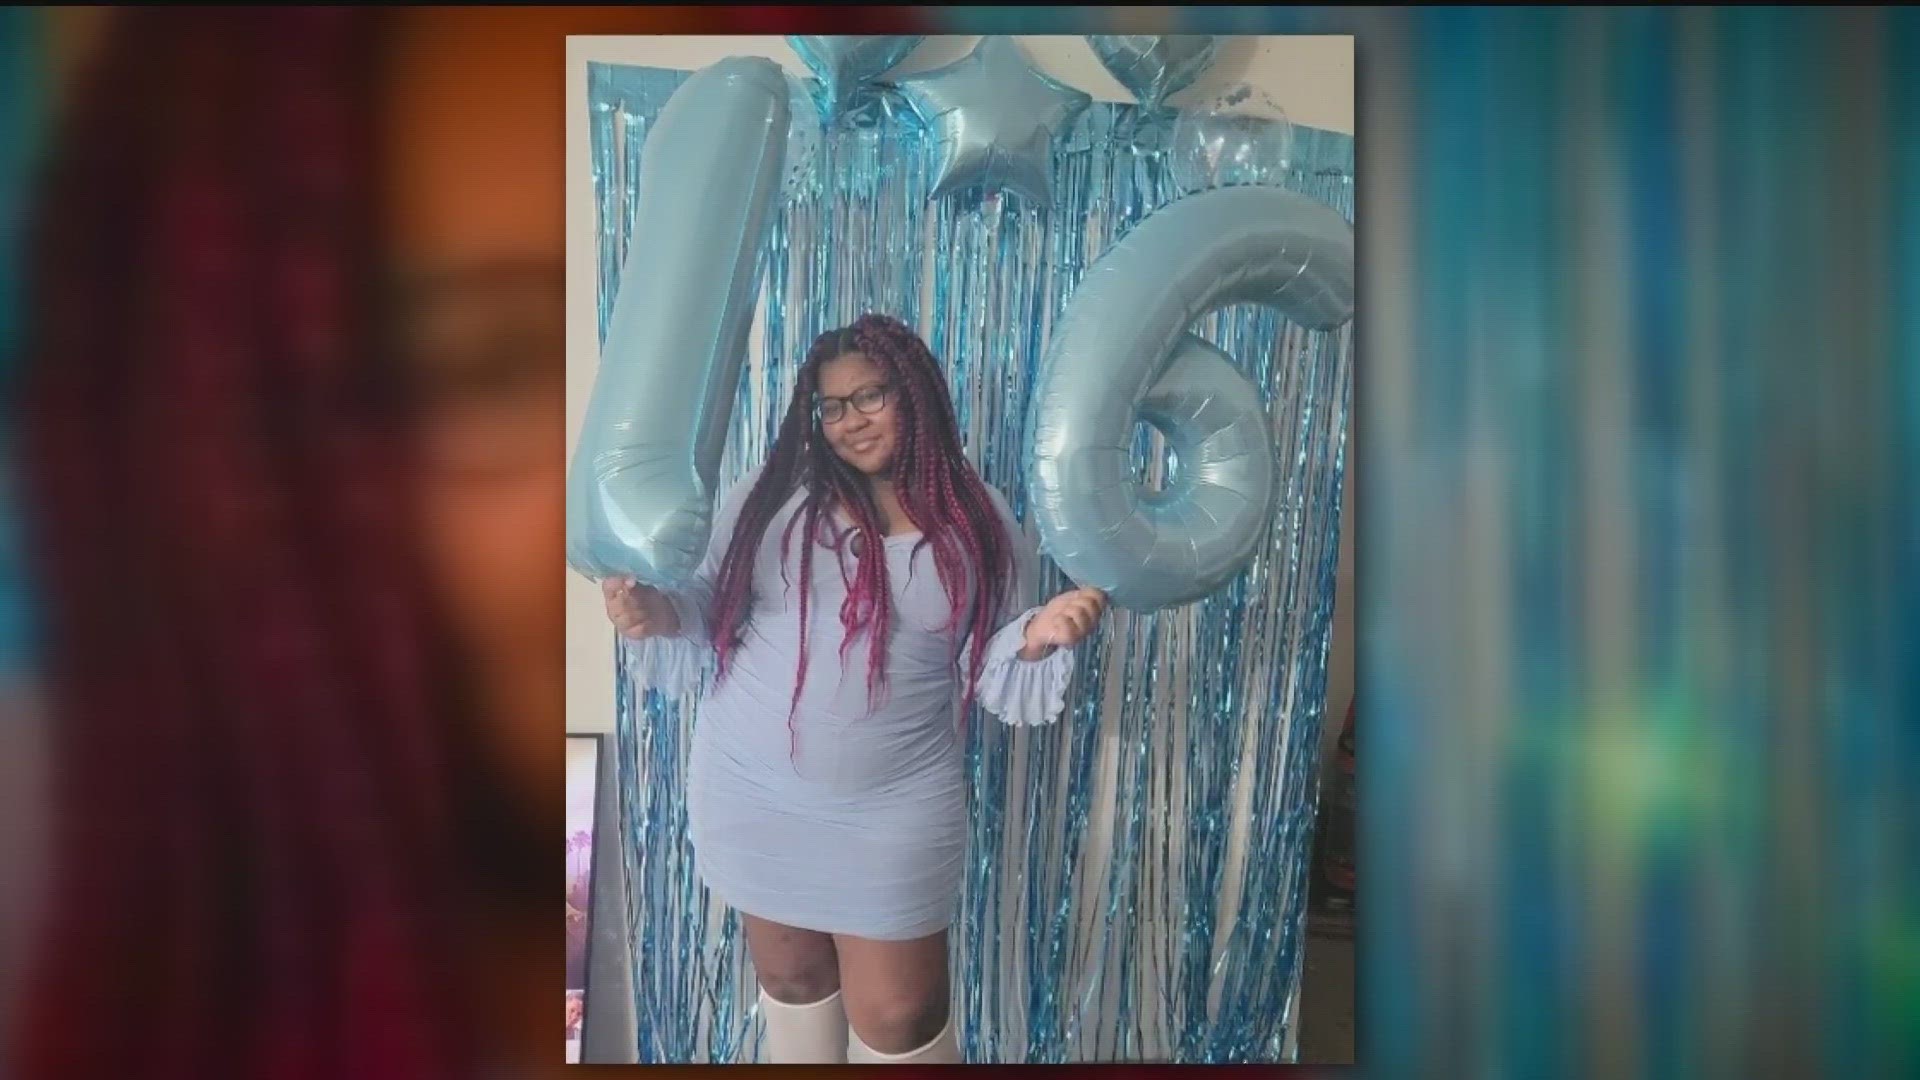 An Atlanta mother is planning the funeral for her 16-year-old daughter. She said her daughter died by suicide on Friday after being bullied online.